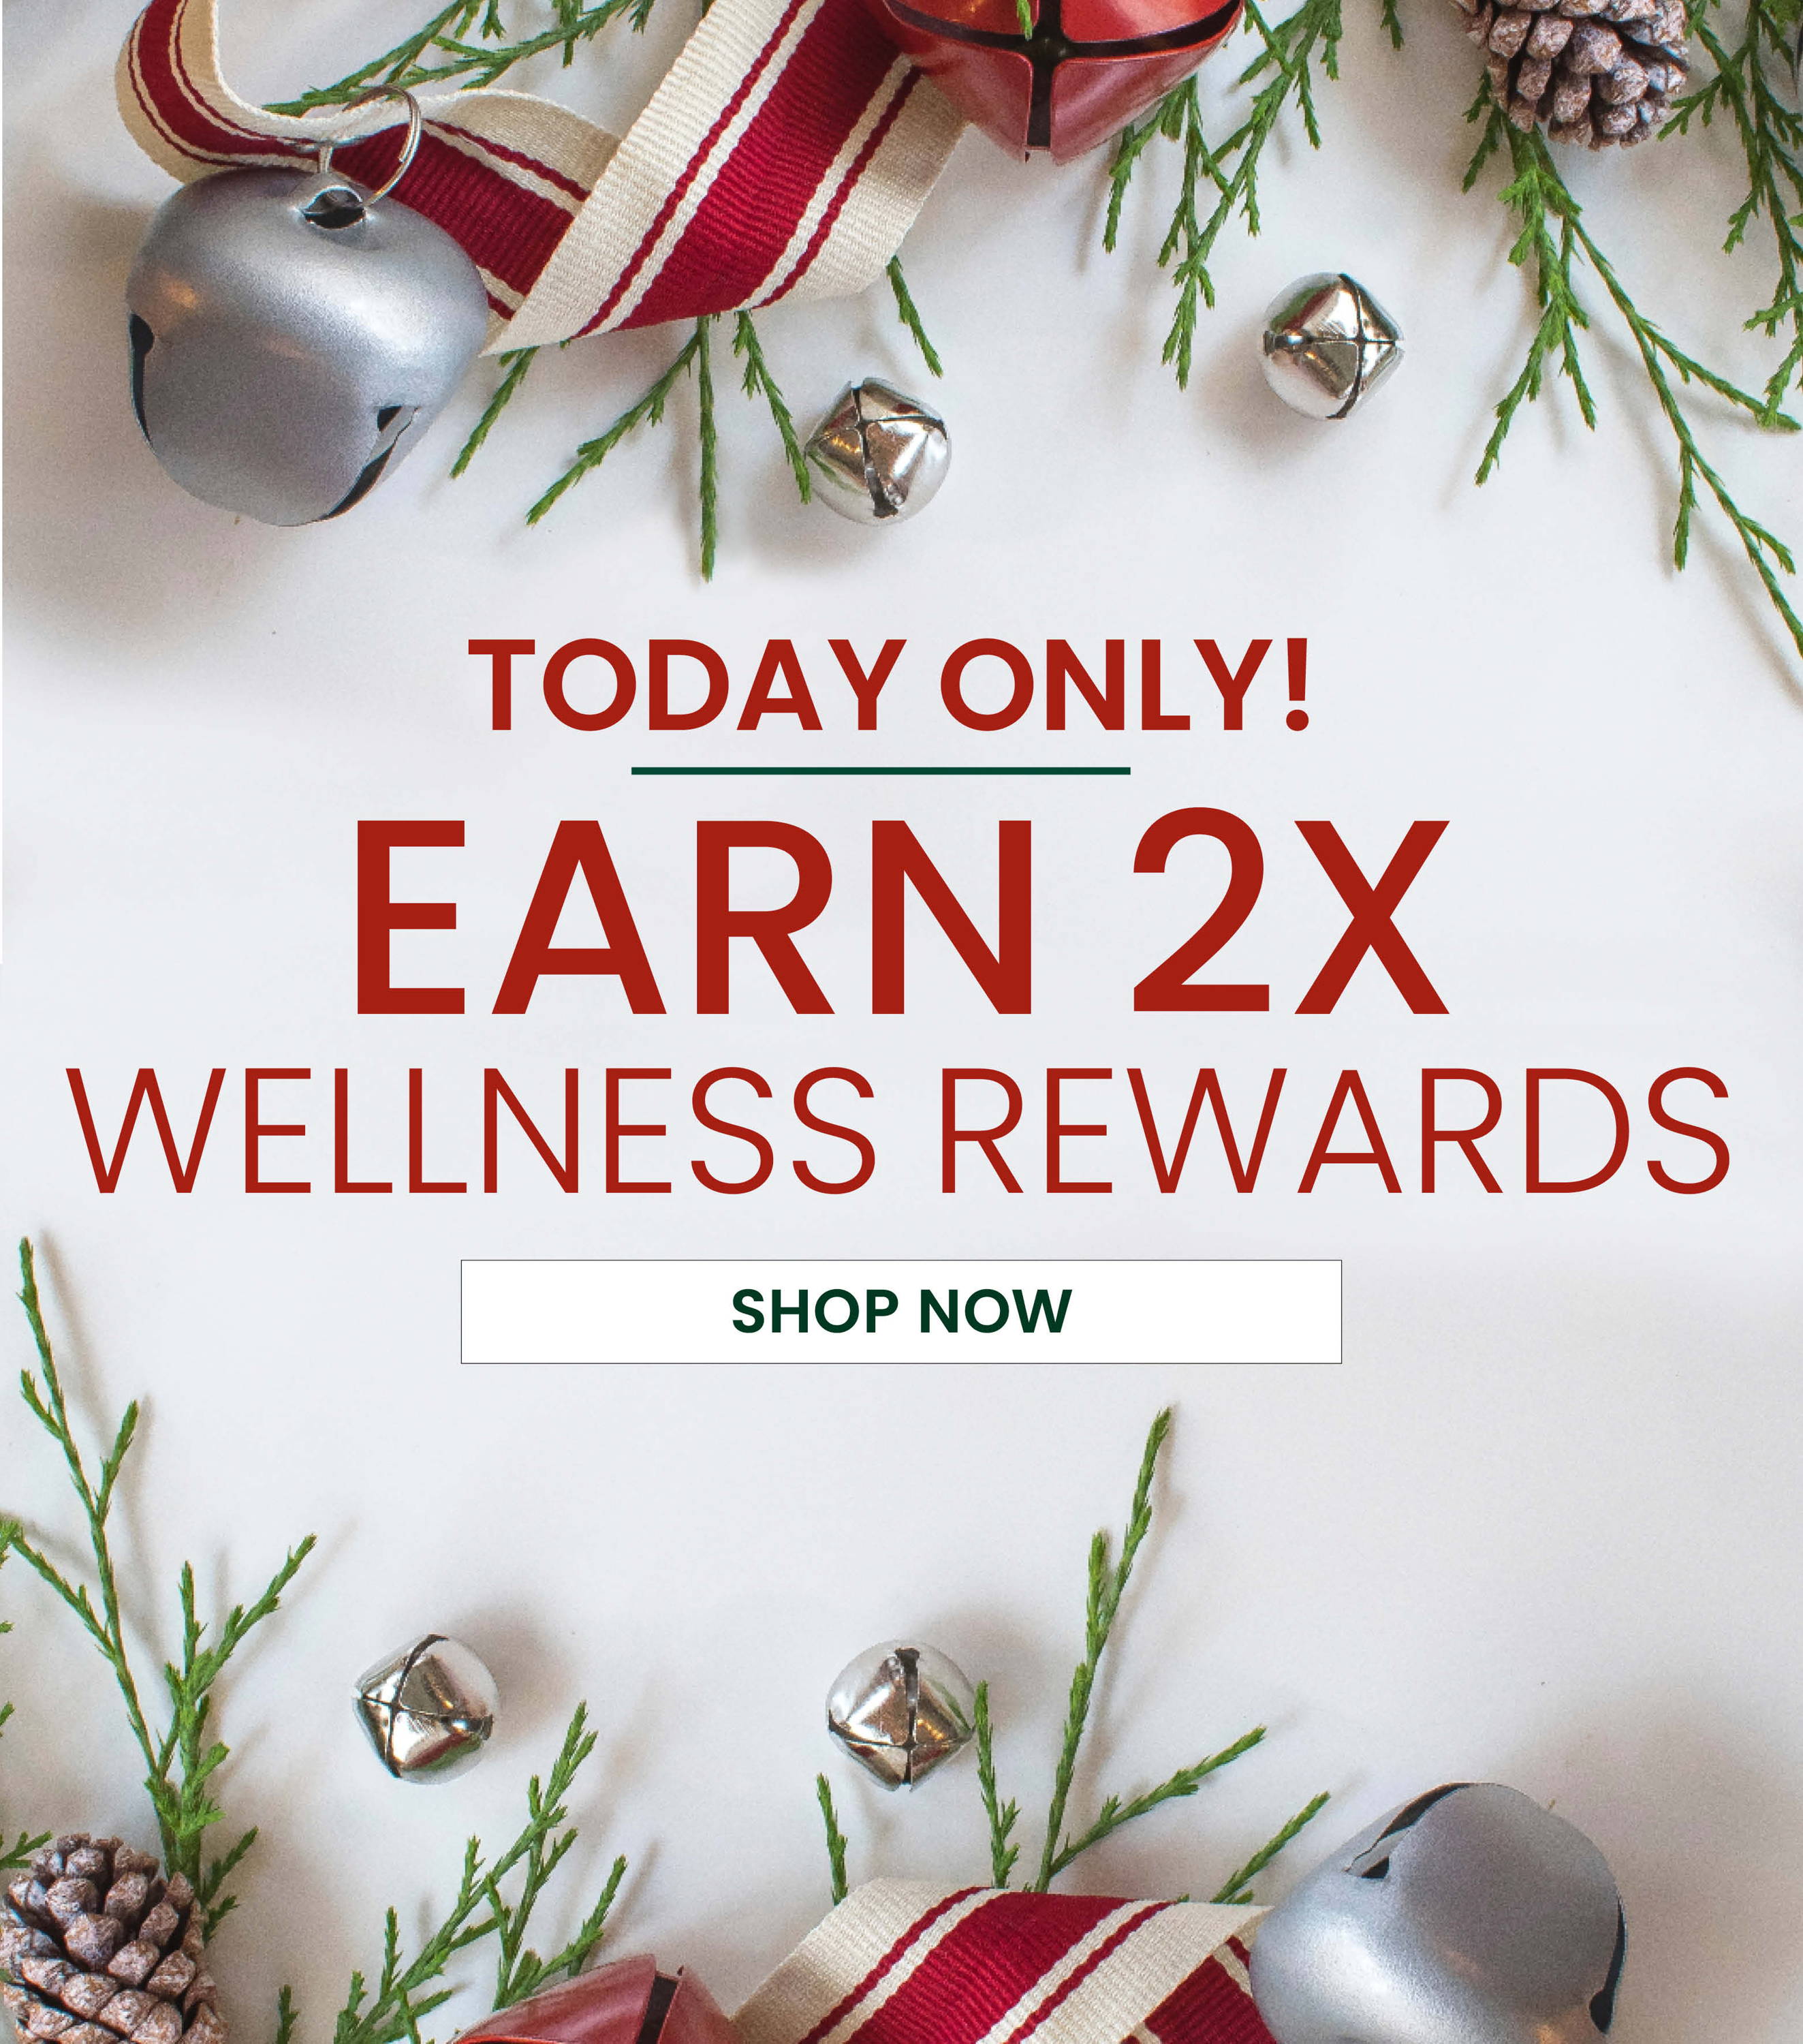 Today Only! Earn 2x Wellness Rewards. Shop Now.